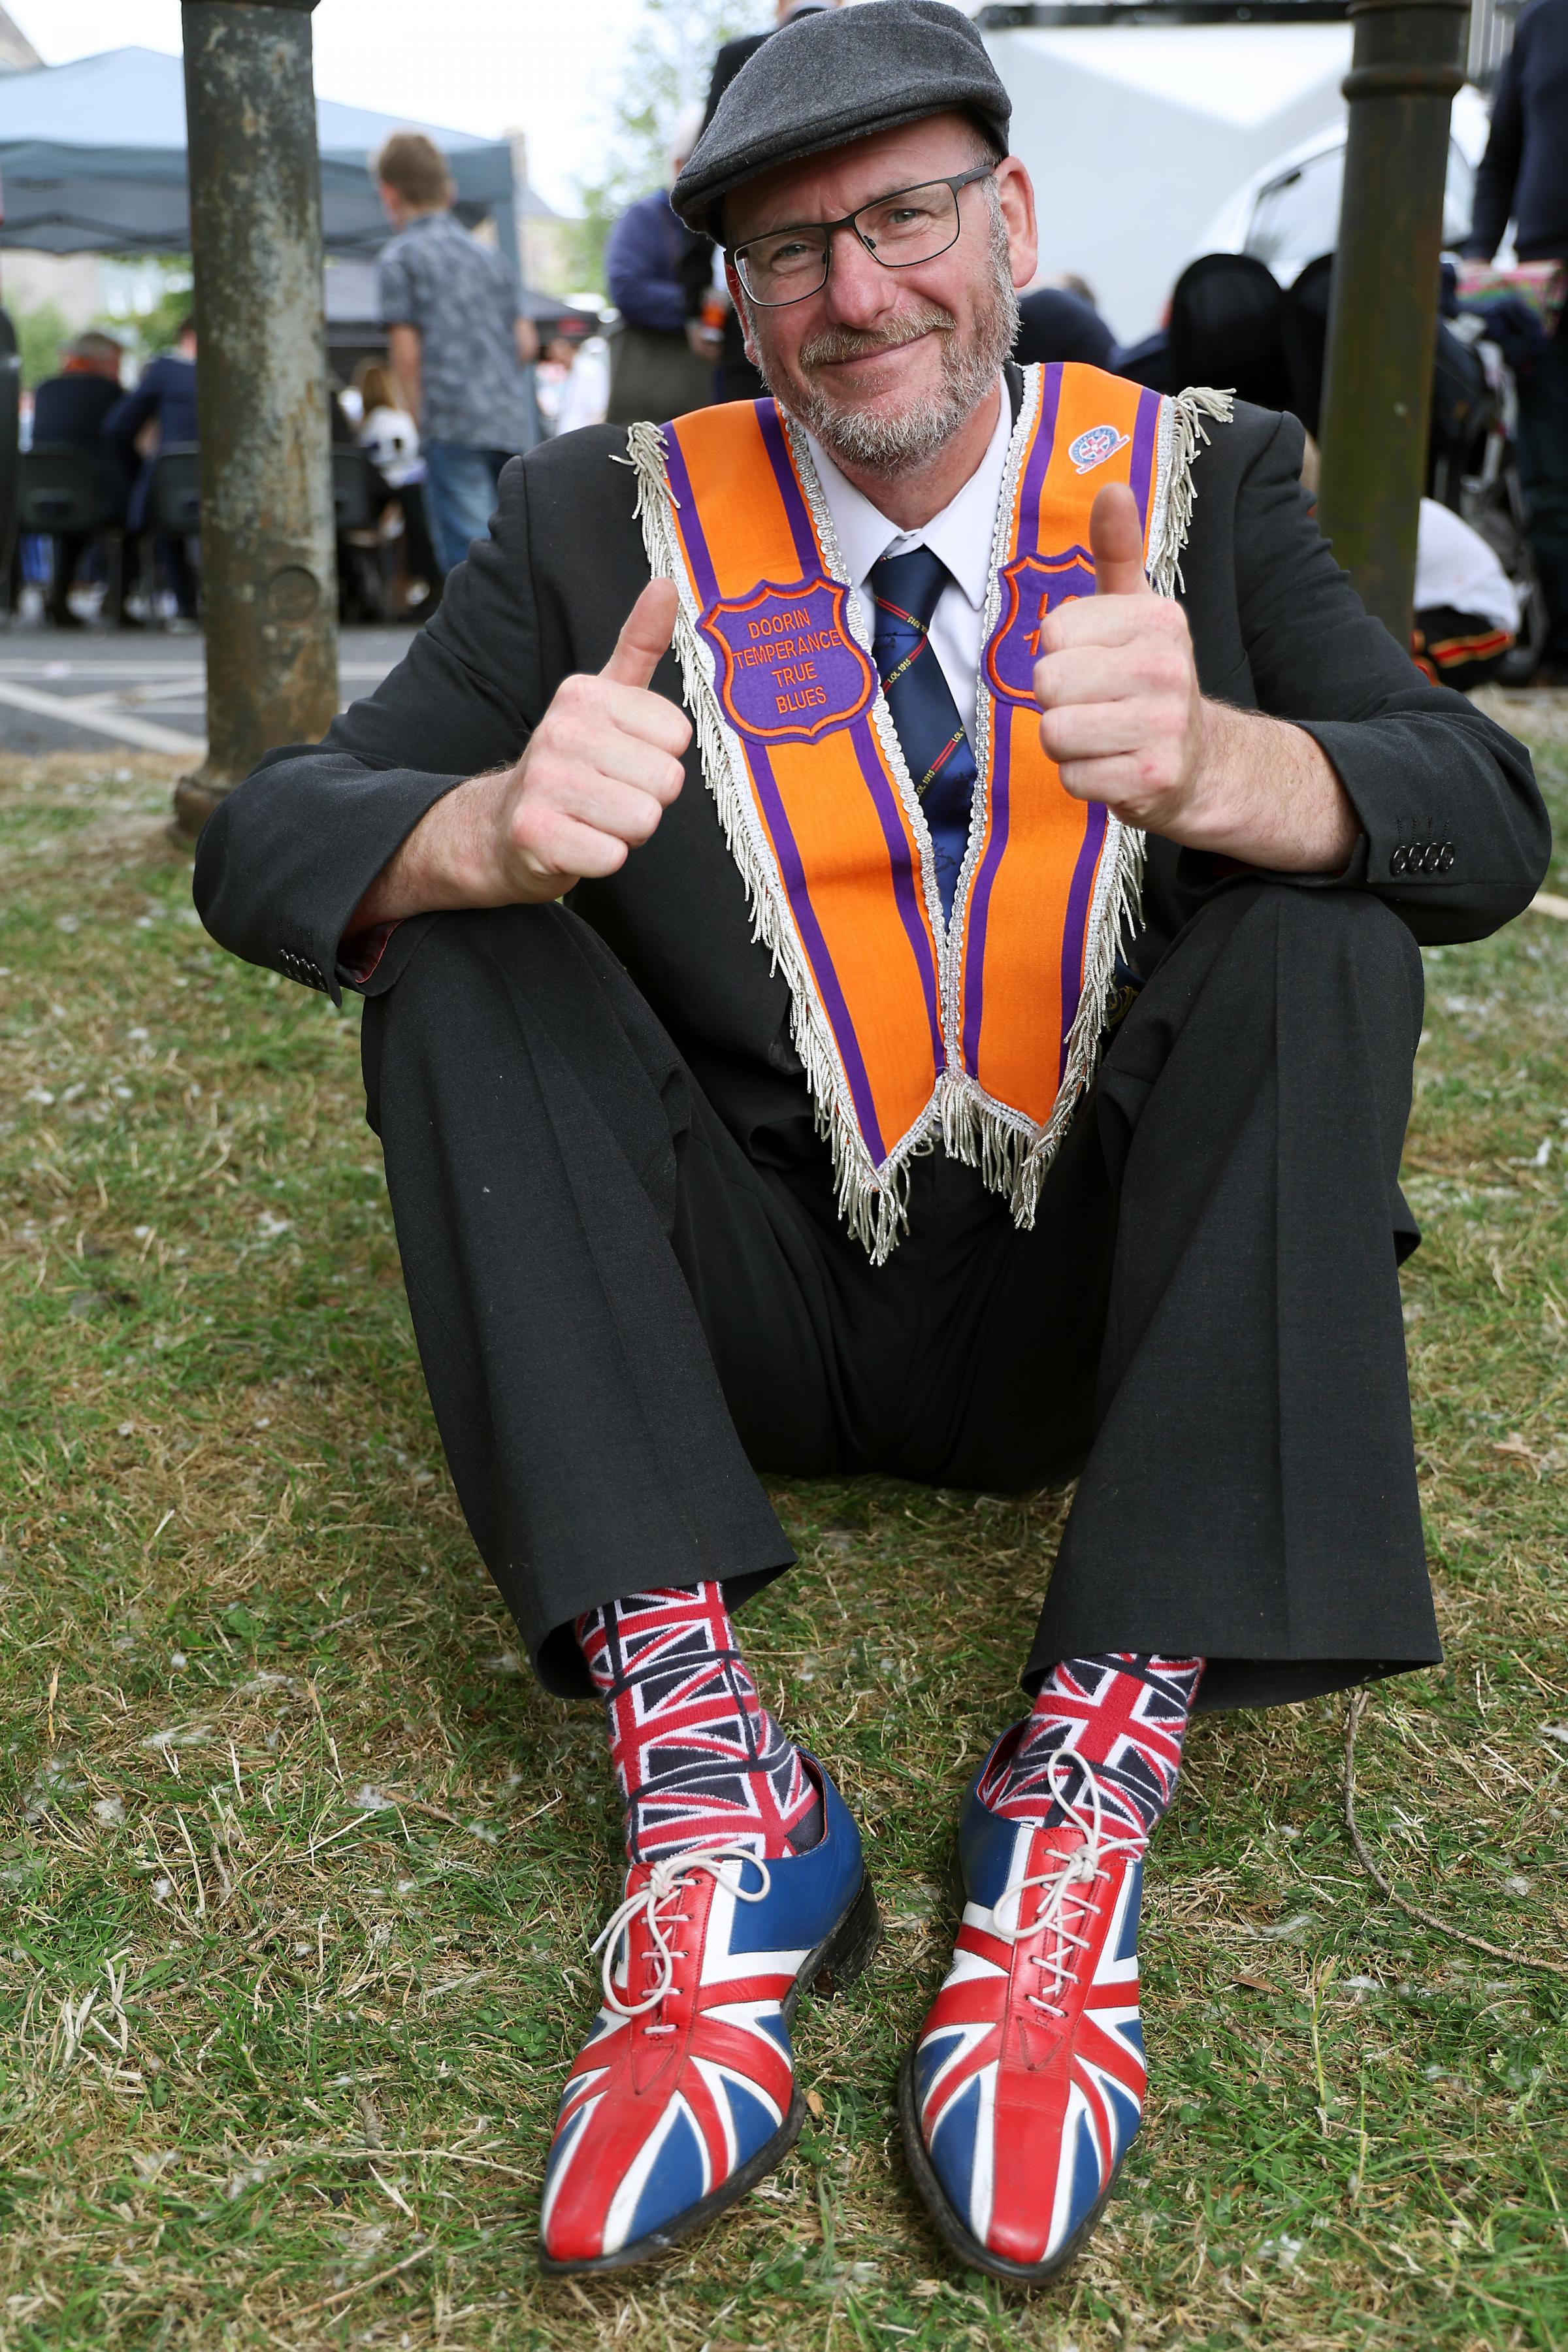 Bro. Alan Maxwell, LOL 1148, Doorin, Co.Donegal all dressed up for the Twelfth Celebrations in Enniskillen..